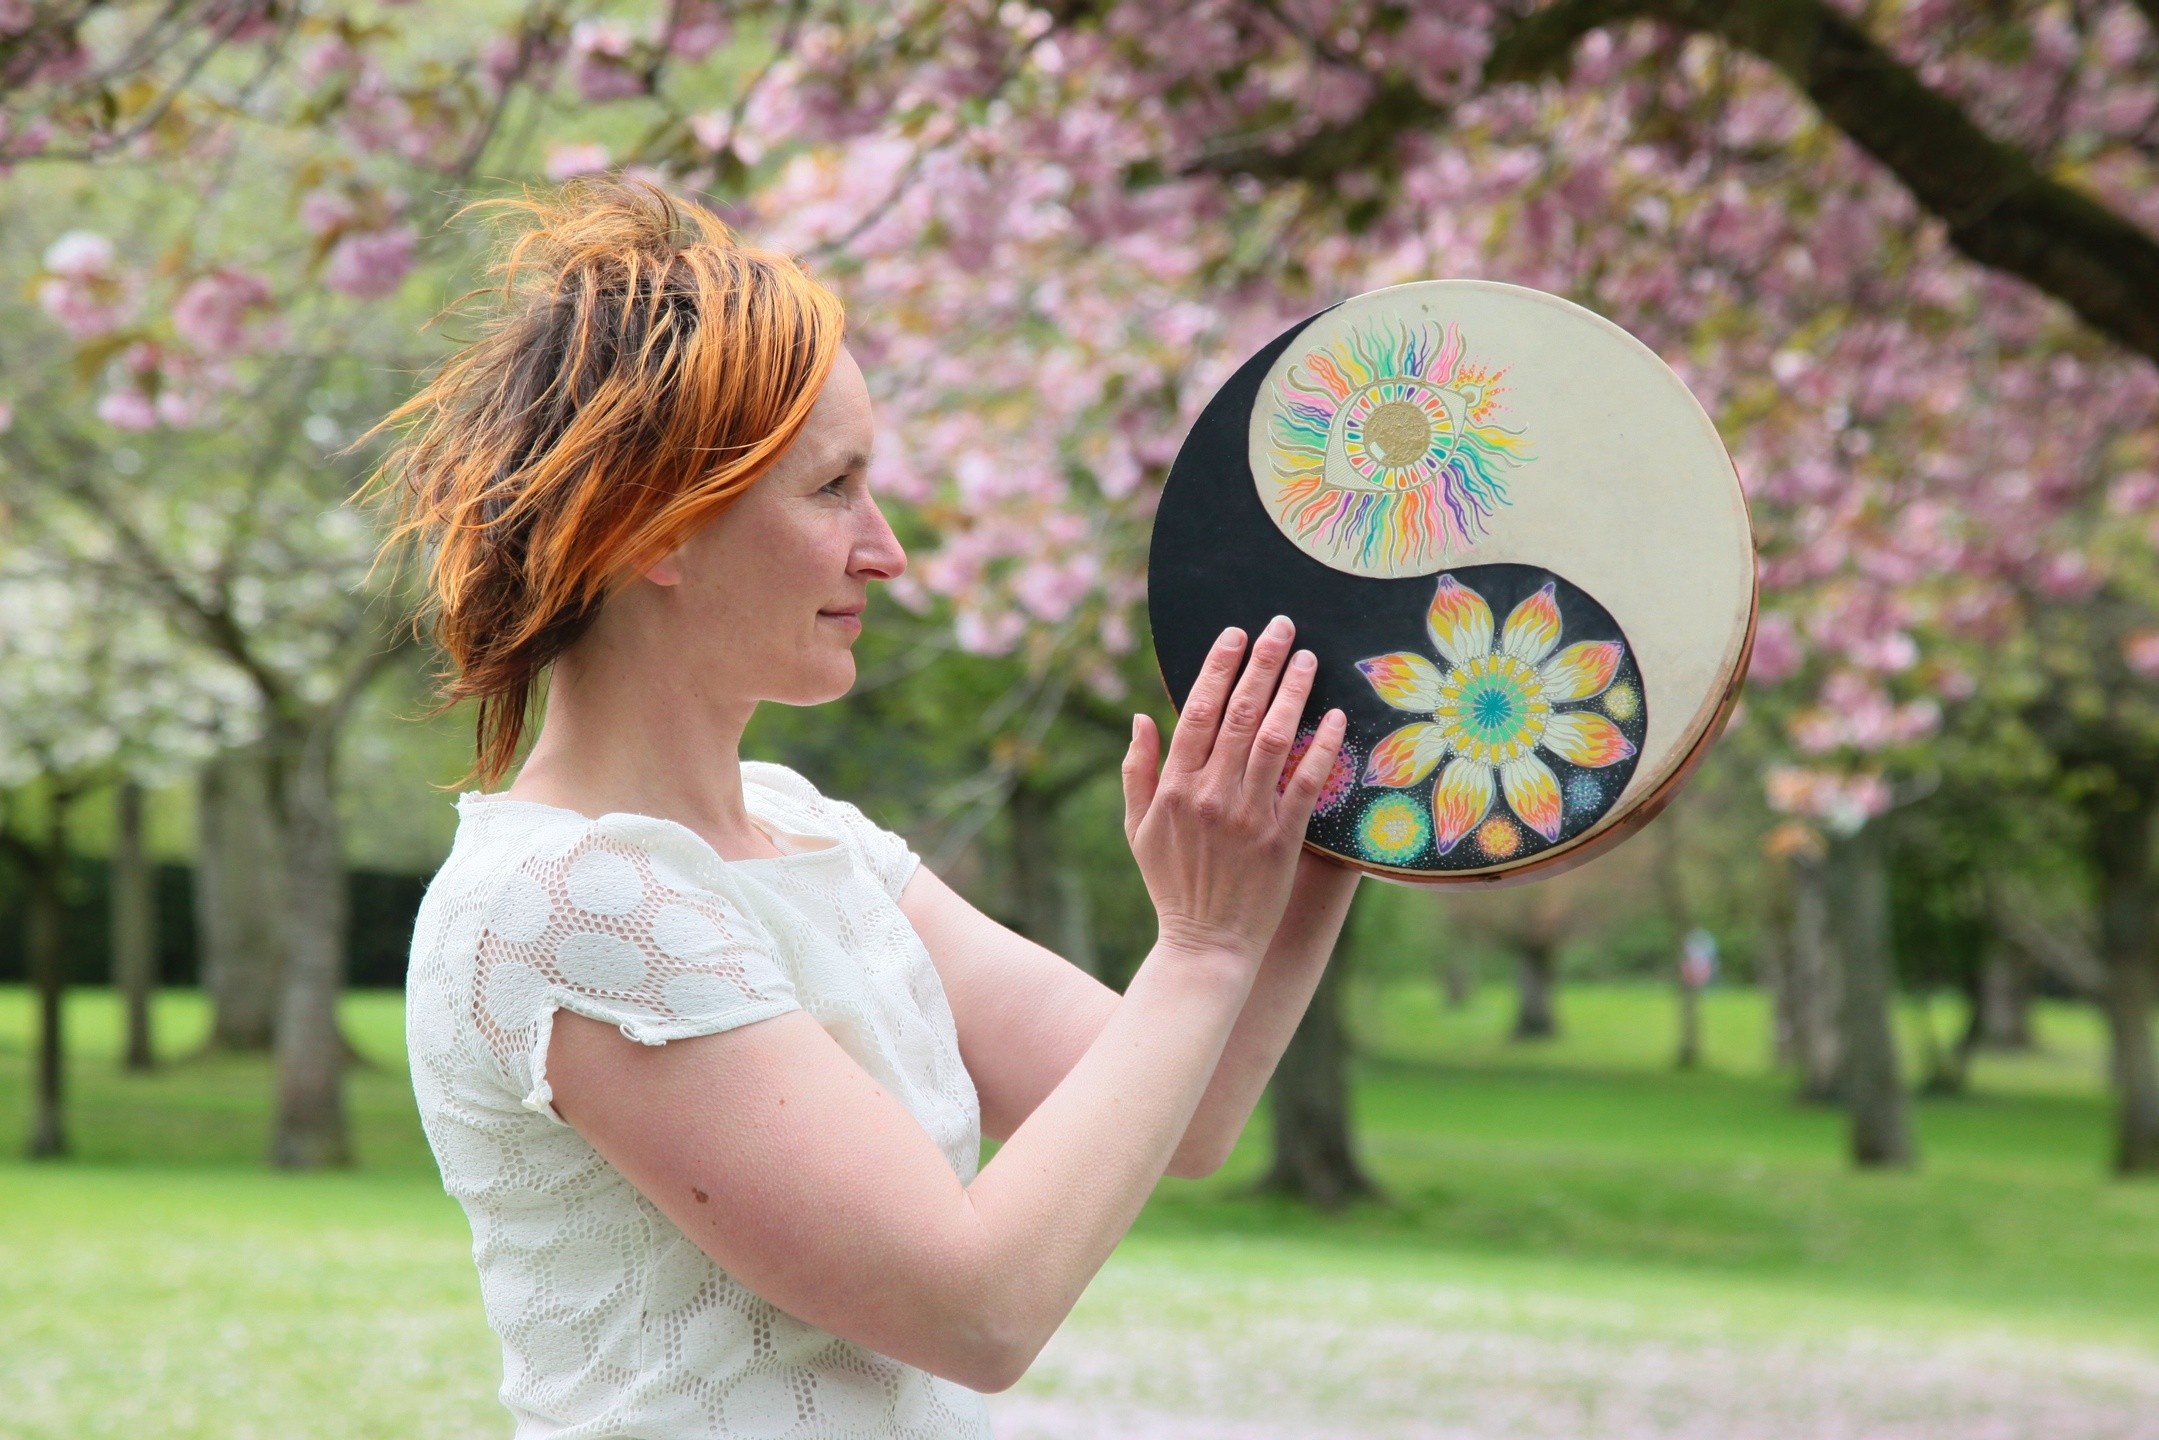 DUBLIN - Level 2 Diploma: Integral Sound Healing For Working 1-2-1 With Clients